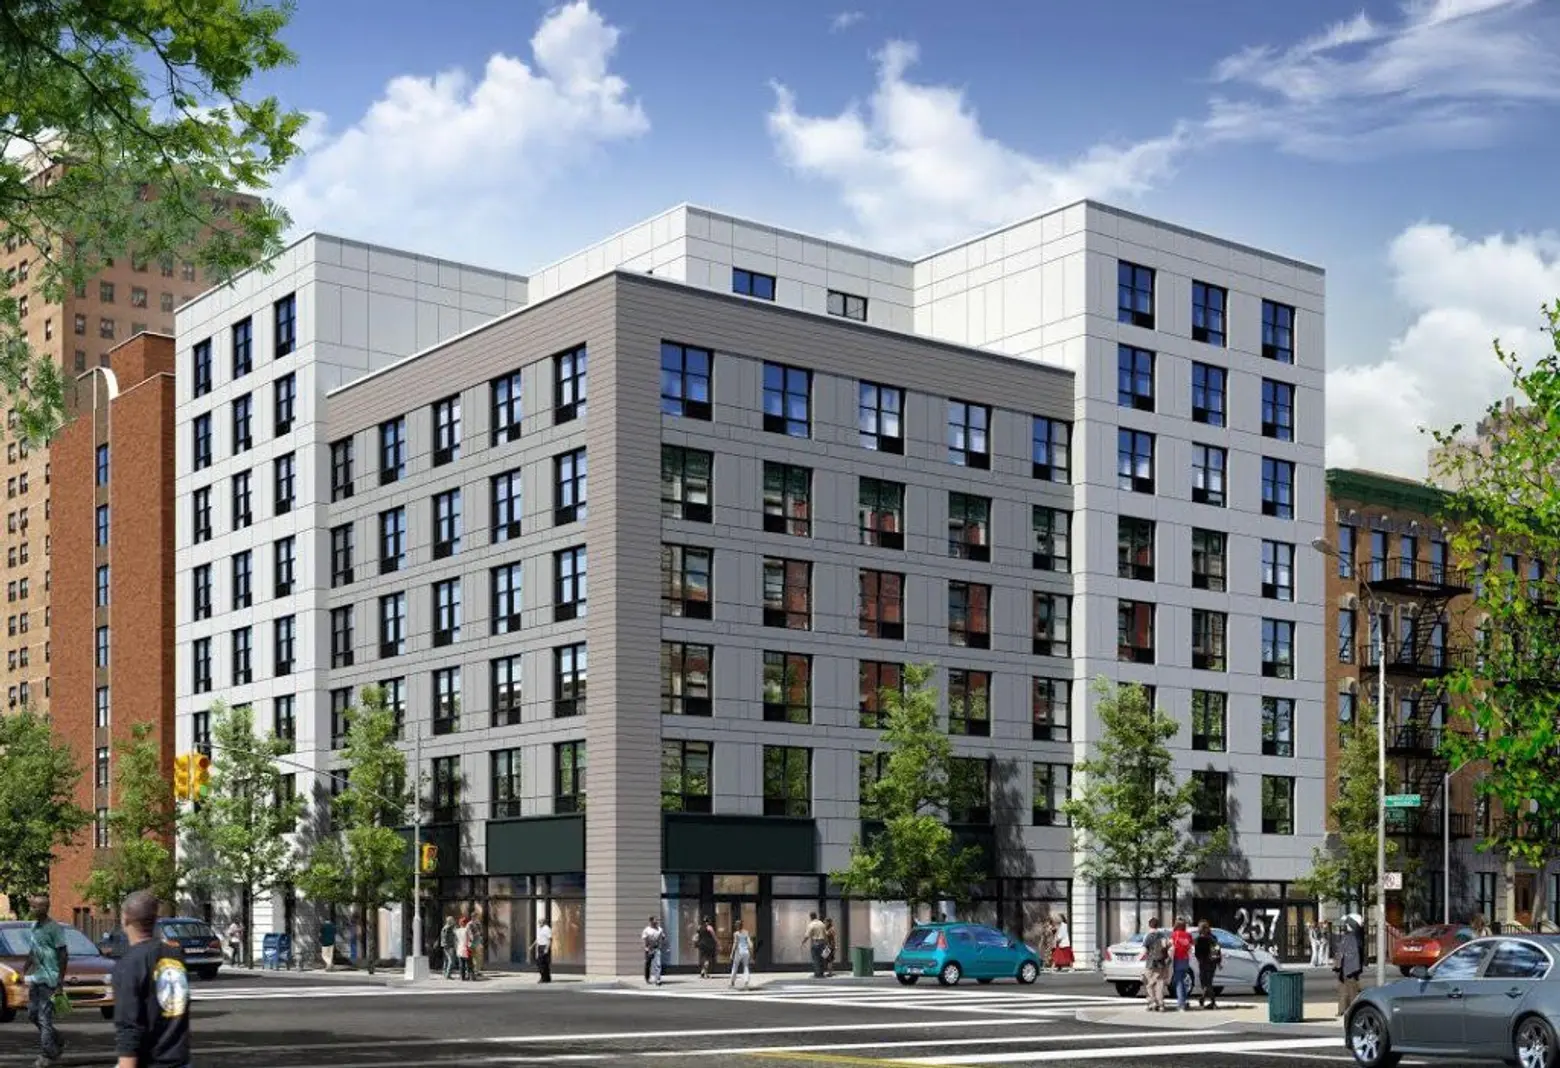 Apply for 53 Affordable Units in Historic Harlem, Starting at $494/Month